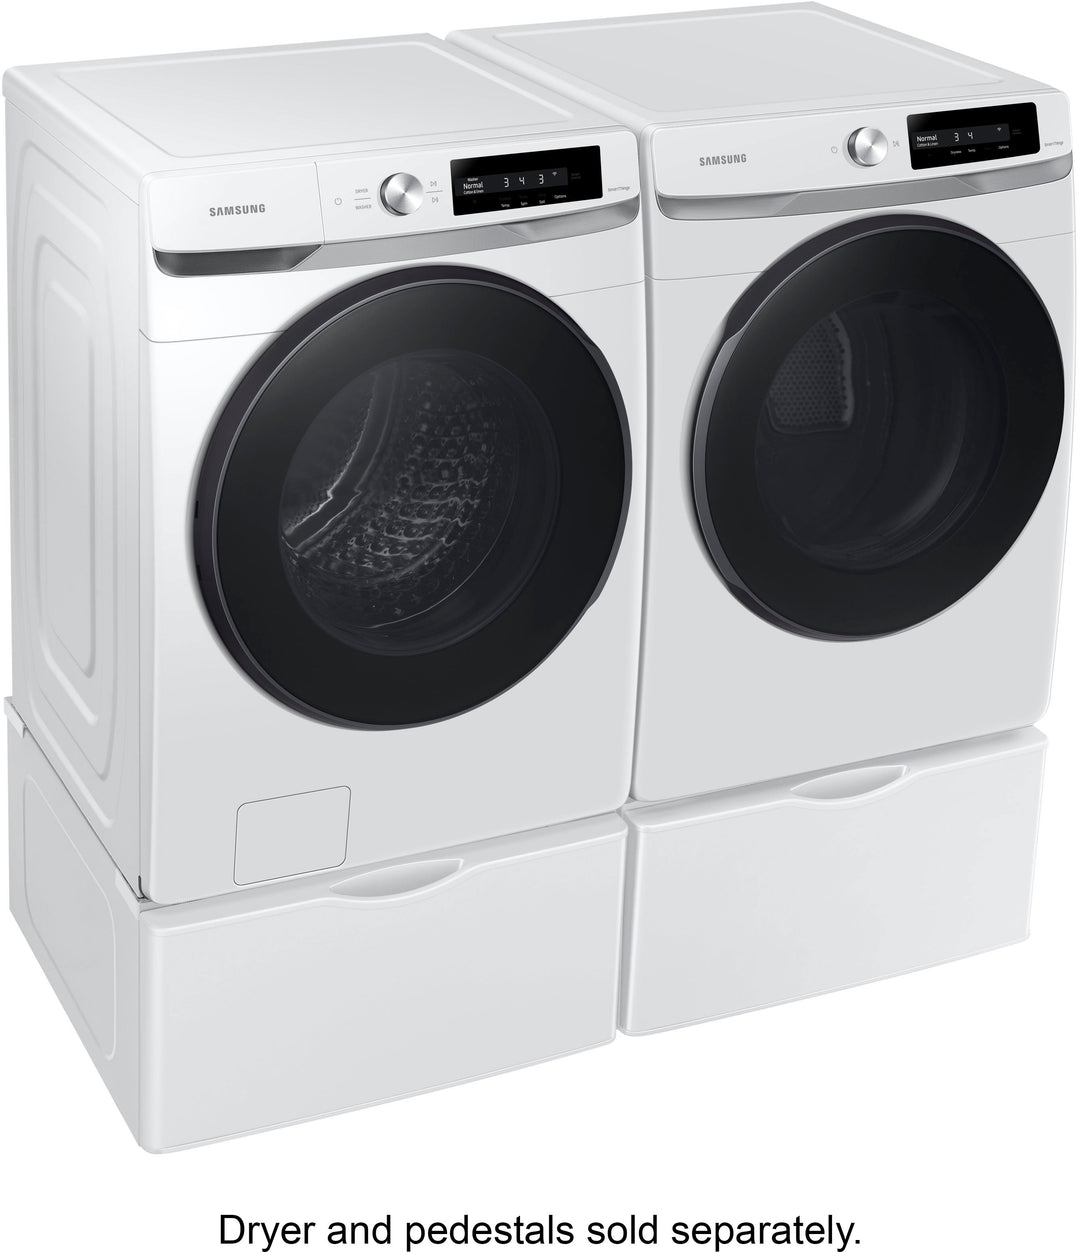 Samsung - 4.5 cu. ft. Large Capacity Smart Dial Front Load Washer with Super Speed Wash - White_3